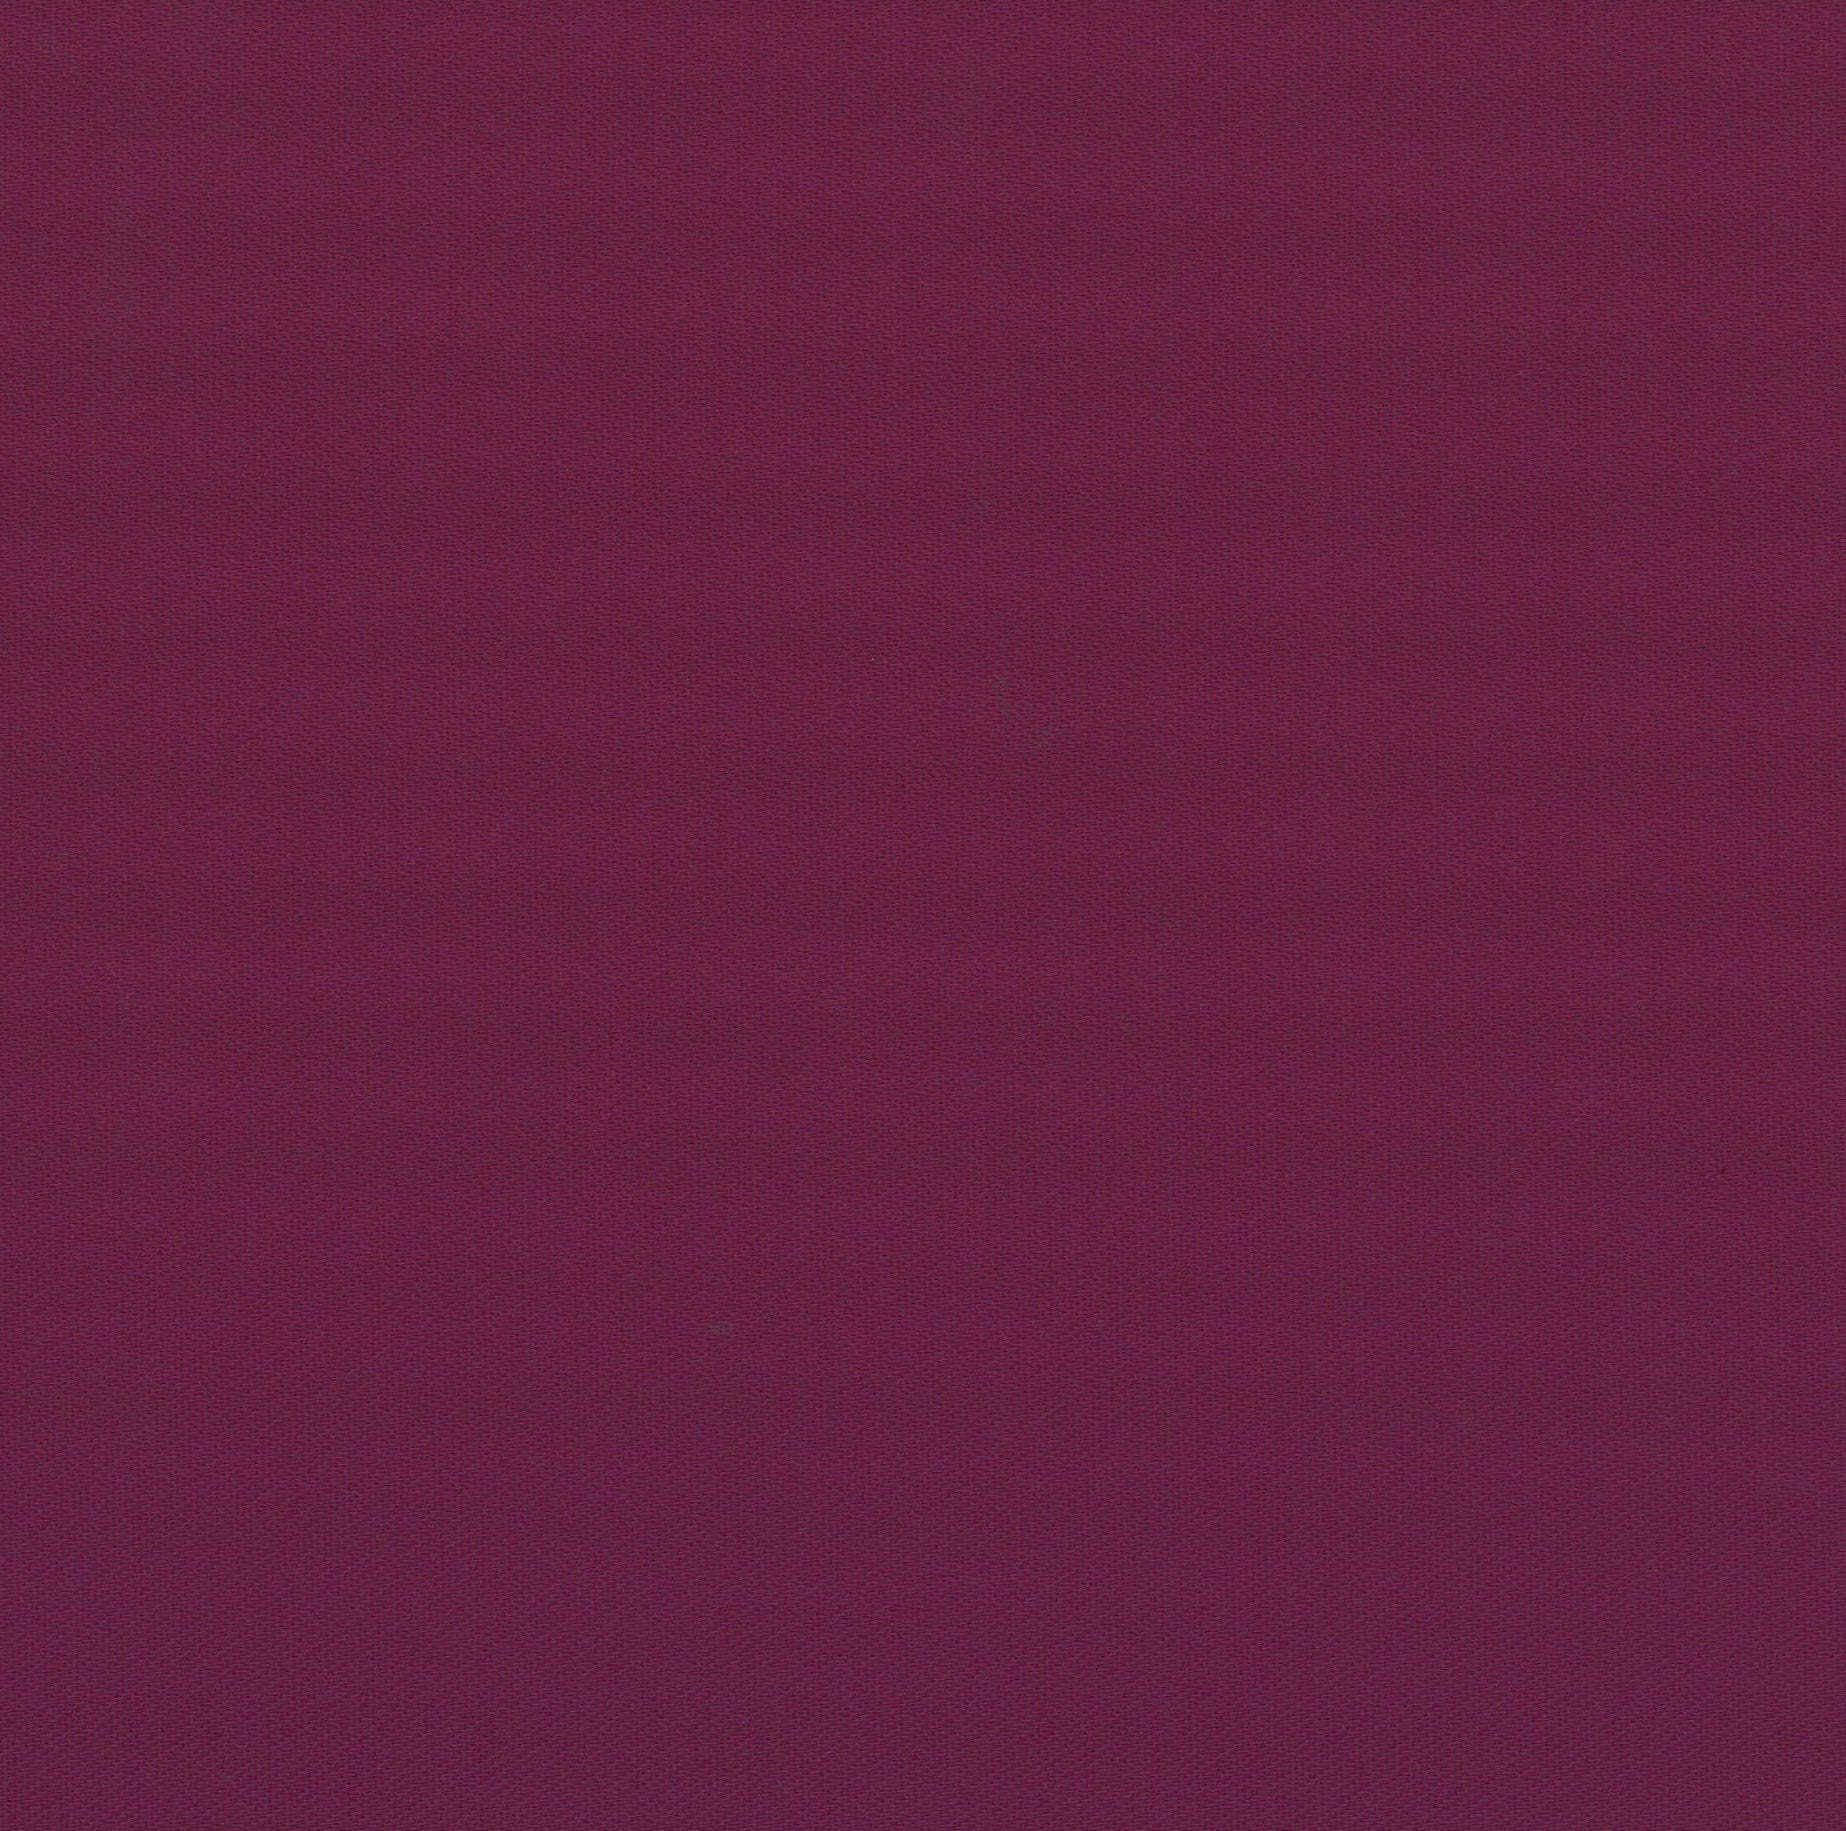 33006-05 Dark Magenta Woven Stretch Plain Dyed Blend 274g/yd 53" plain dyed polyester red spandex woven woven stretch Solid Color - knit fabric - woven fabric - fabric company - fabric wholesale - fabric b2b - fabric factory - high quality fabric - hong kong fabric - fabric hk - acetate fabric - cotton fabric - linen fabric - metallic fabric - nylon fabric - polyester fabric - spandex fabric - chun wing hing - cwh hk - fabric worldwide ship - 針織布 - 梳織布 - 布料公司- 布料批發 - 香港布料 - 秦榮興